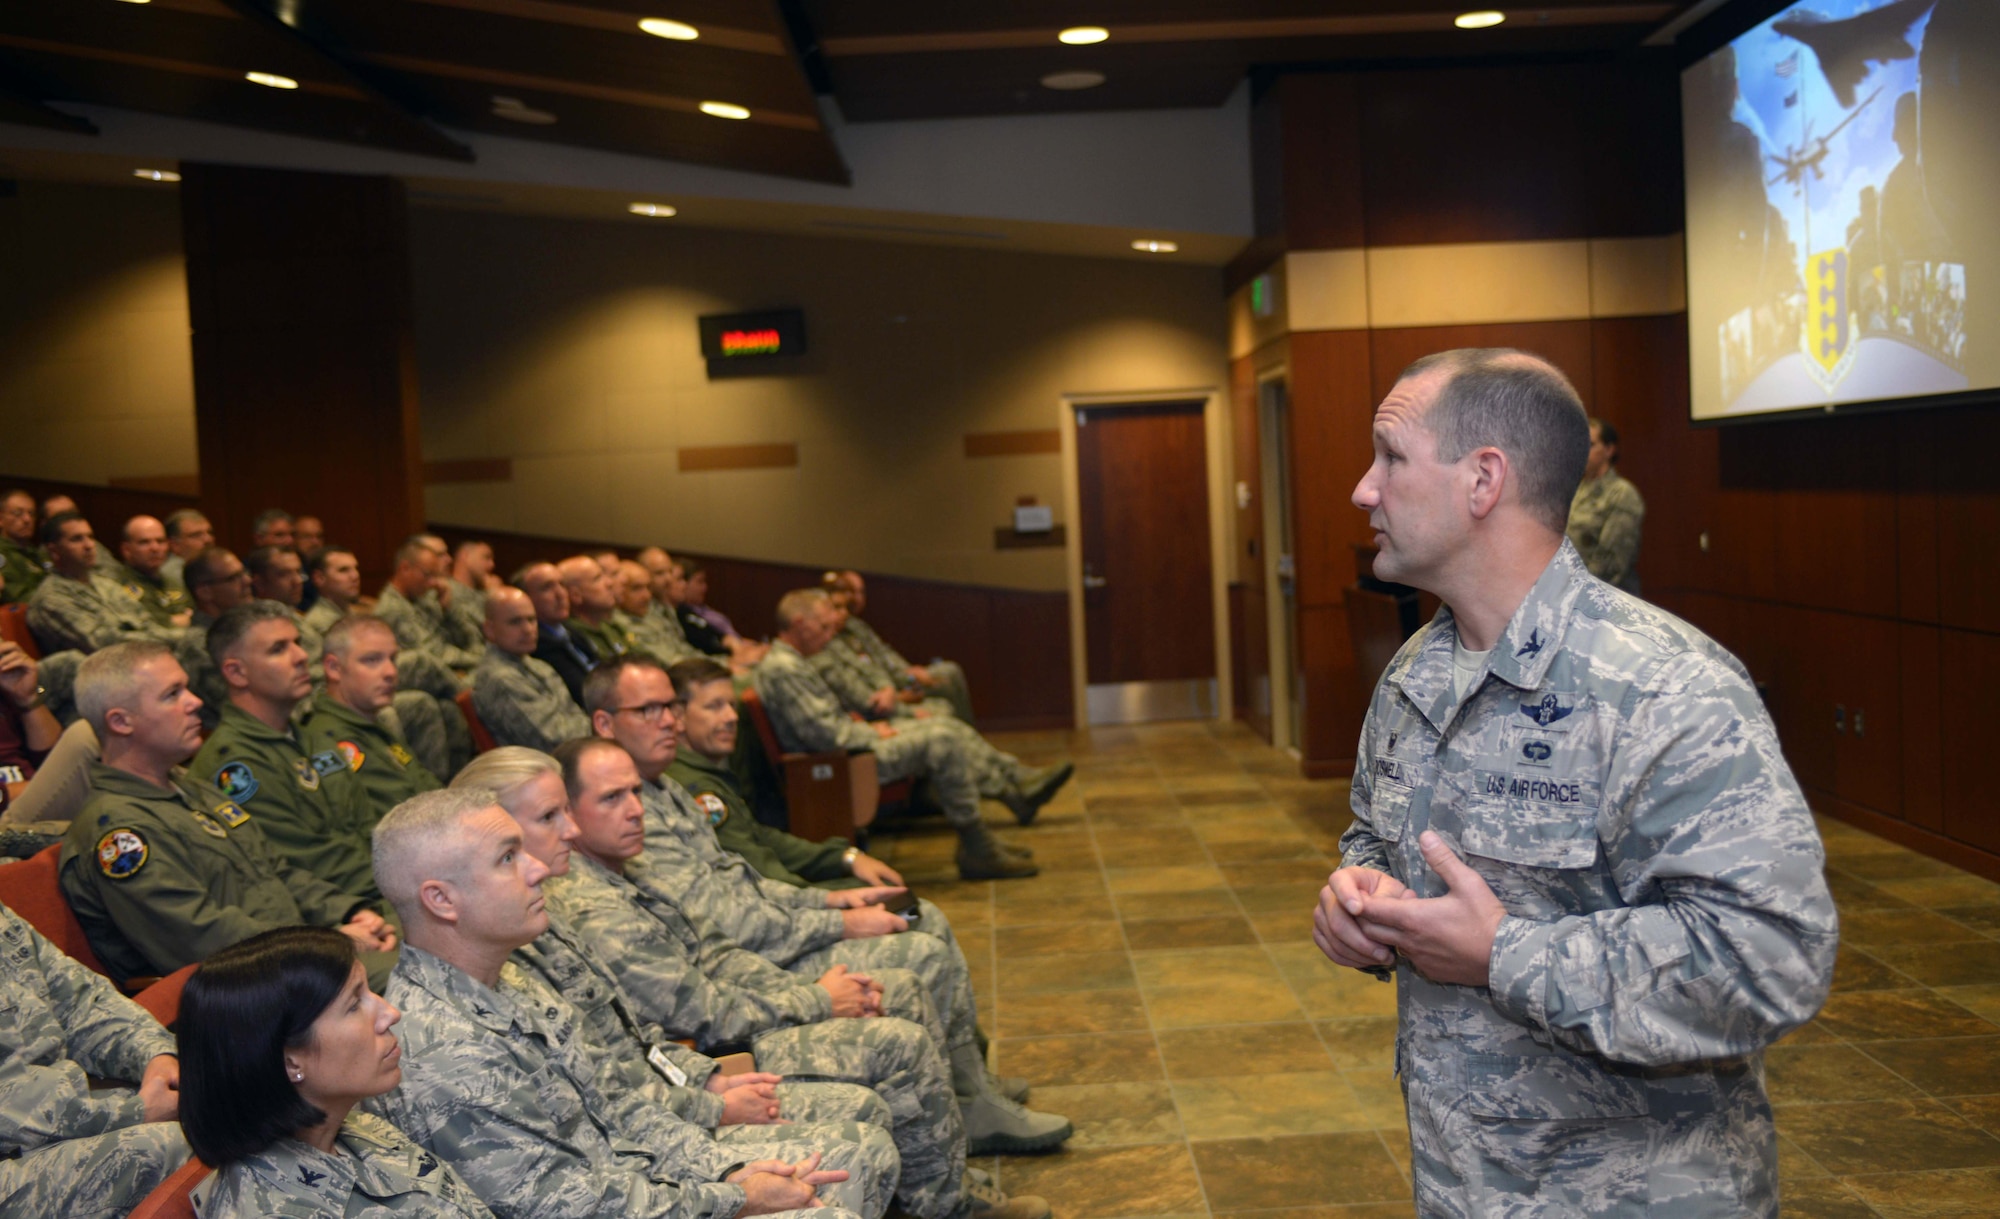 Col. Gentry Boswell, 28th Bomb Wing commander, provides opening remarks to inspection team members at the unit mission briefing at Ellsworth Air Force Base, S.D., Aug. 21, 2016. During a Unit Effectiveness Inspection, inspectors validate and verify a wing commander's Inspection Program for accuracy, adequacy and relevance, and provide an independent assessment of the Wing’s ability to execute the mission. (U.S. Air Force photo by Airman 1st Class Donald C. Knechtel/Released)